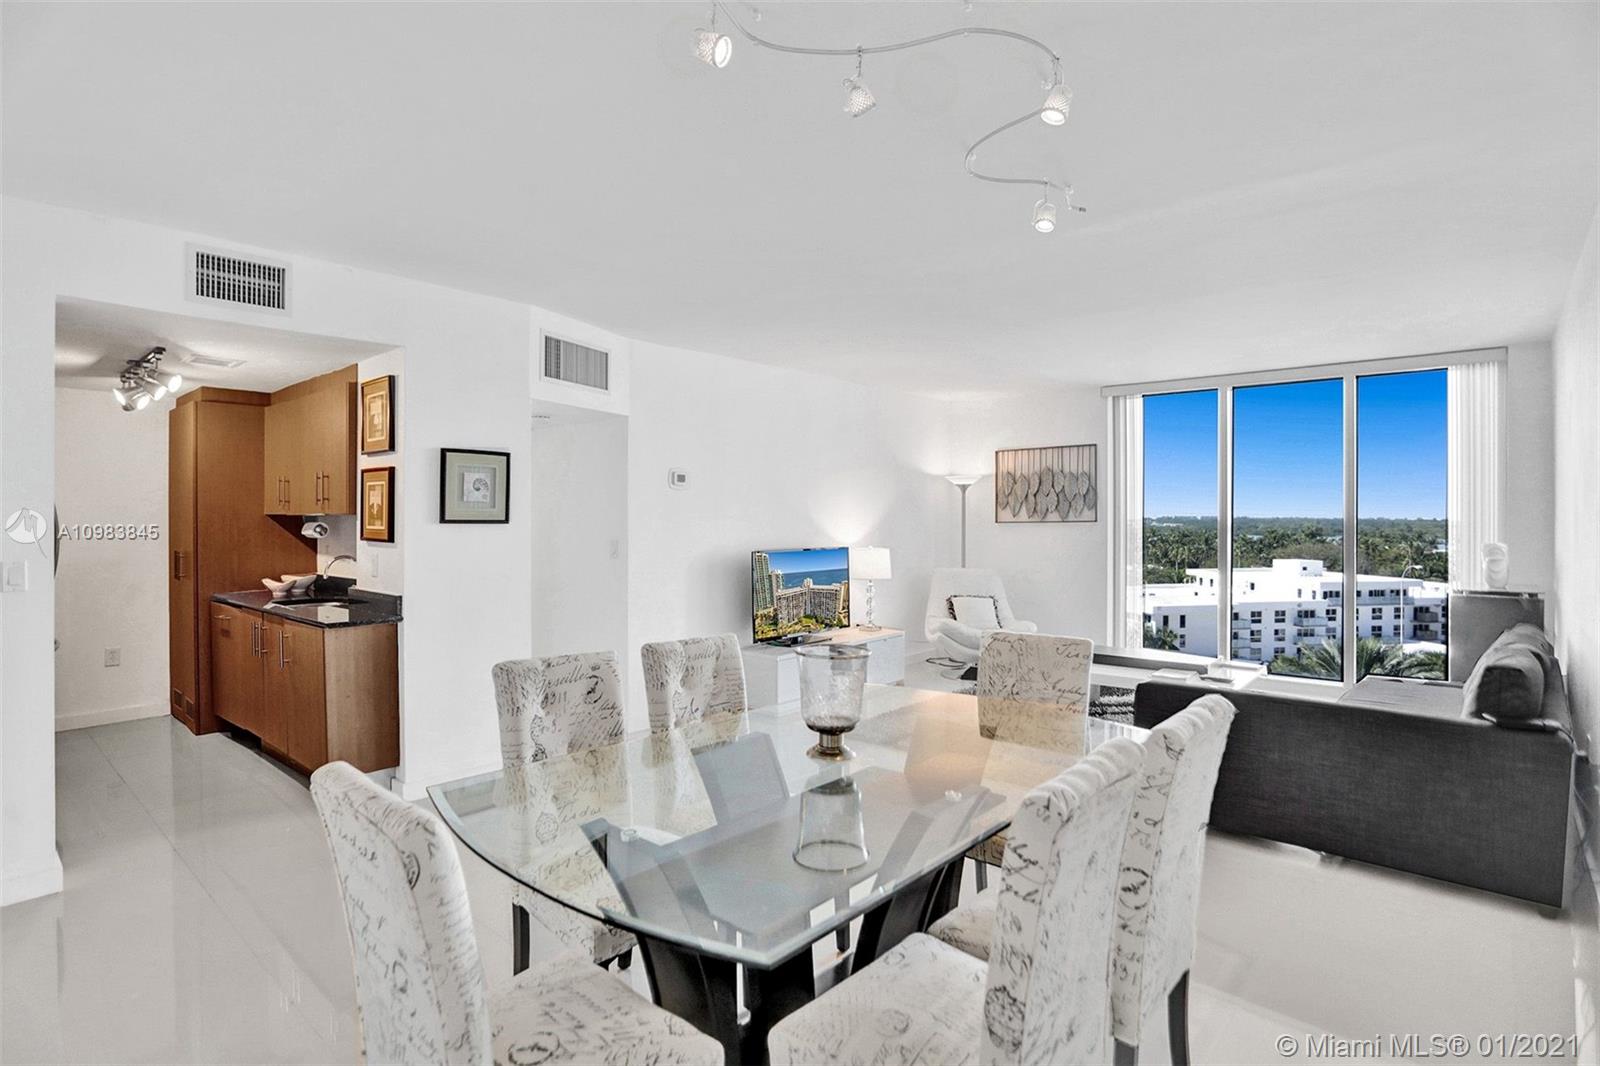 Photo 2 of Harbour House Apt 623 in Bal Harbour - MLS A10983845